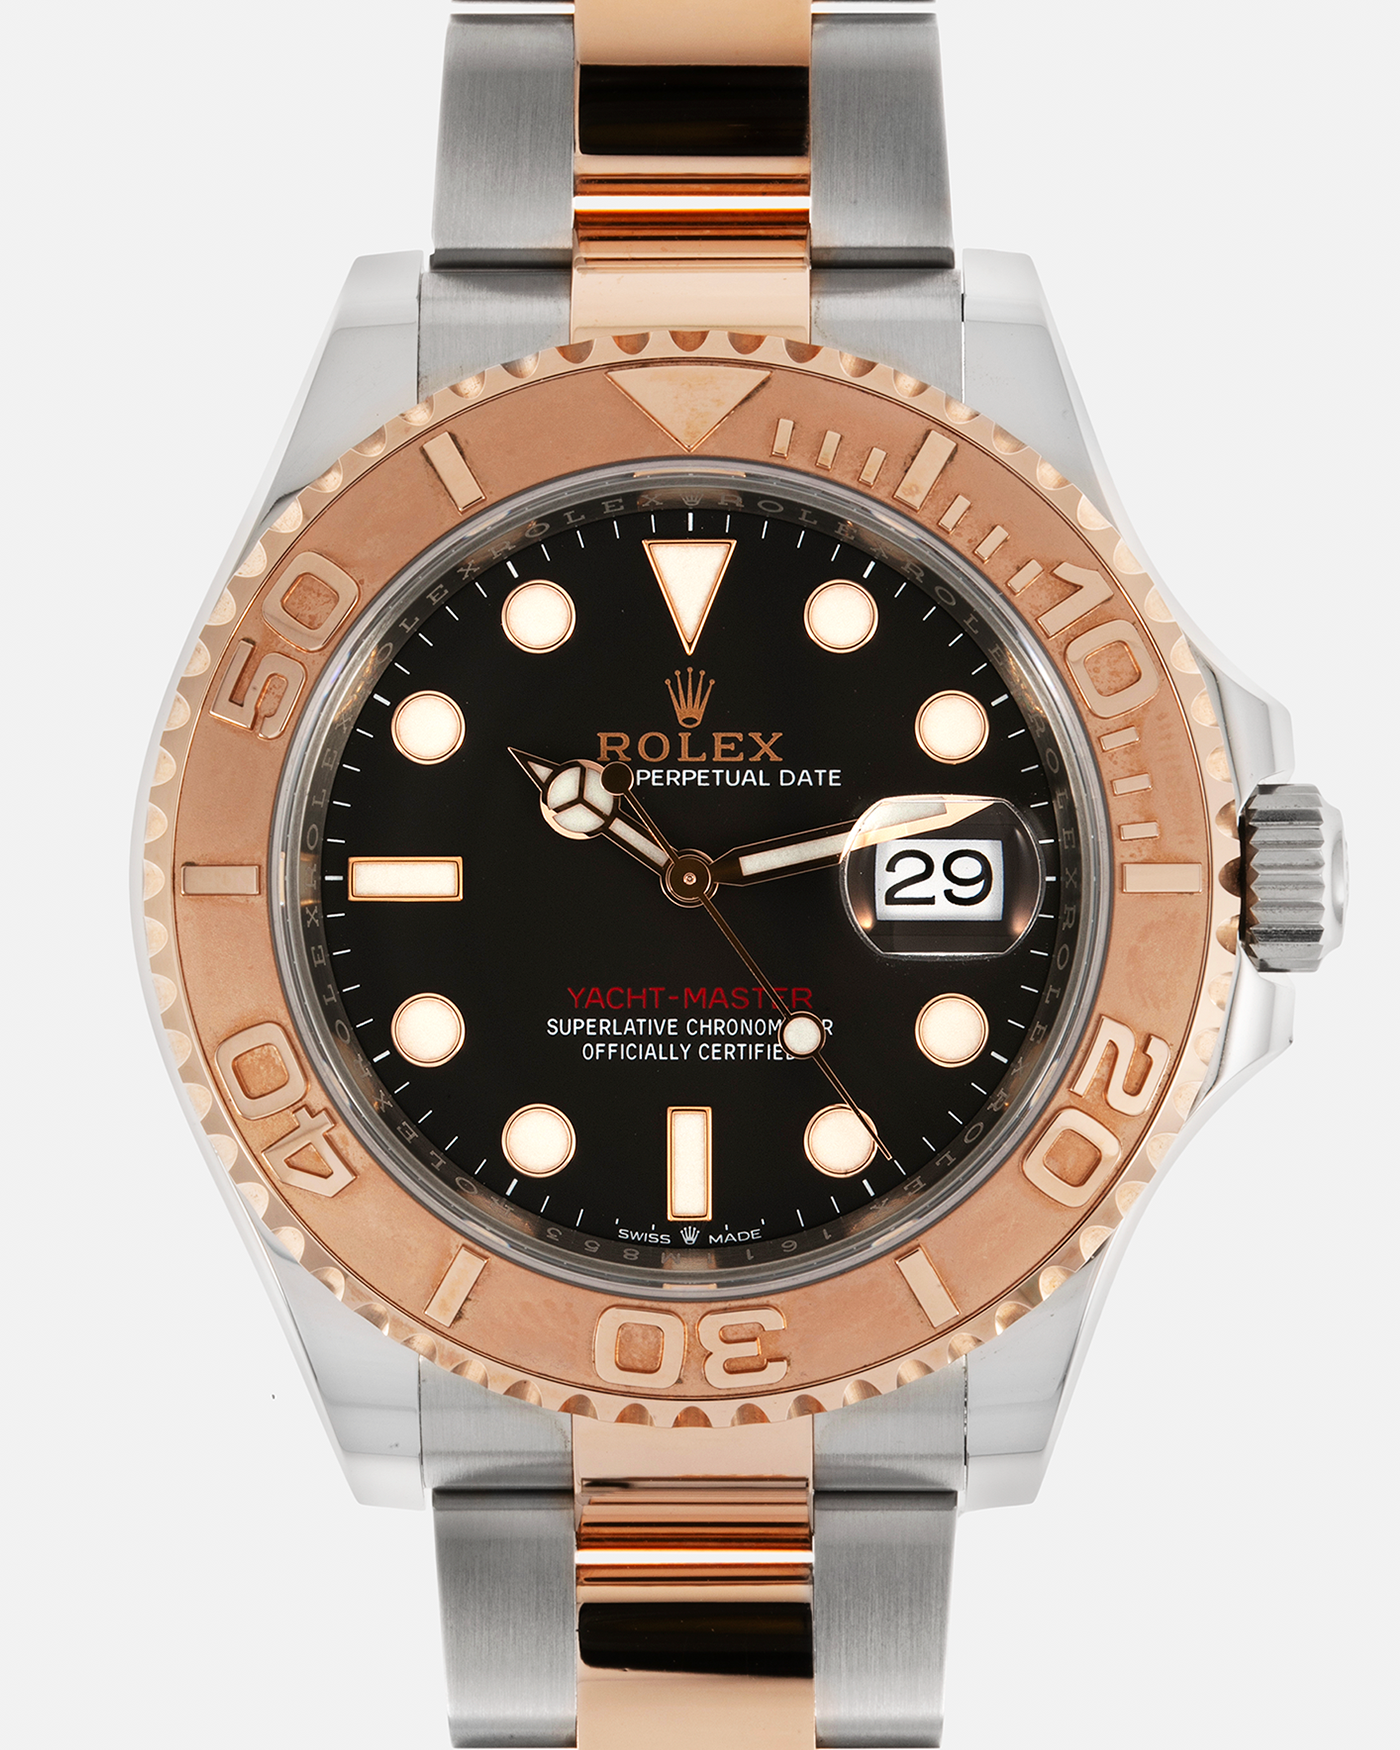 Brand: Rolex Year: 2021 Model: Yacht-Master 40 Reference Number: 116621 Material: Two Tone 904L Stainless Steel and 18-carat Everose Gold (Everose Rolesor) Movement: Rolex Cal. 3135, Self-Winding Case Diameter: 40mm Lug Width: 20mm Bracelet: Rolex Everose Rolesor Two-Tone Oyster Bracelet with Folding Oysterlock Safety Clasp and Easylink Extension System